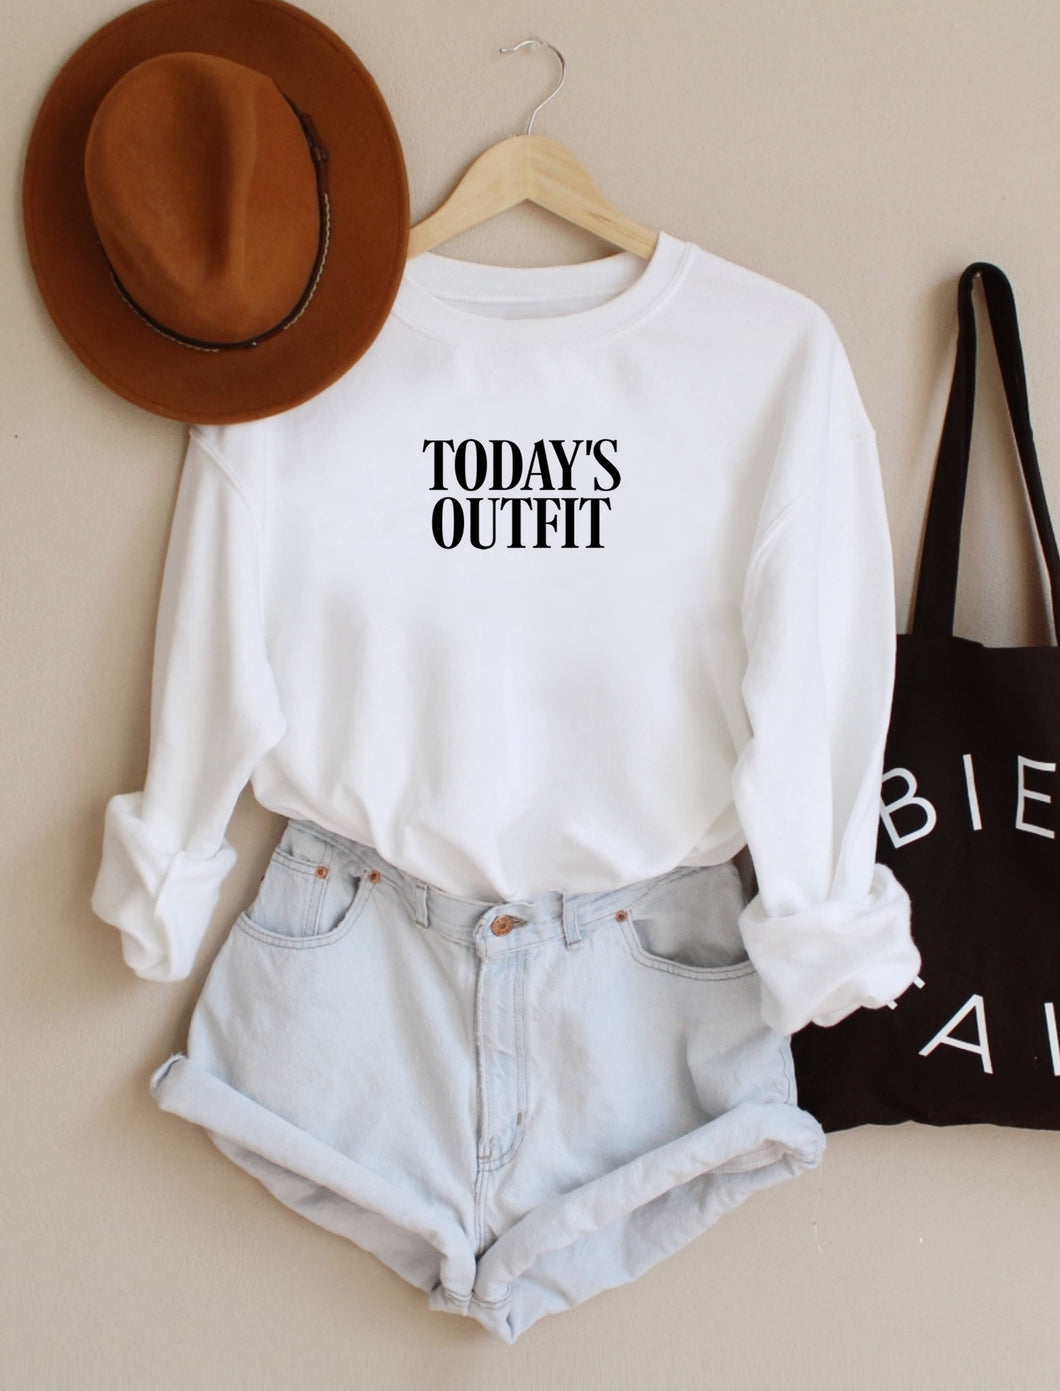 Today's outfit | Sweatshirt